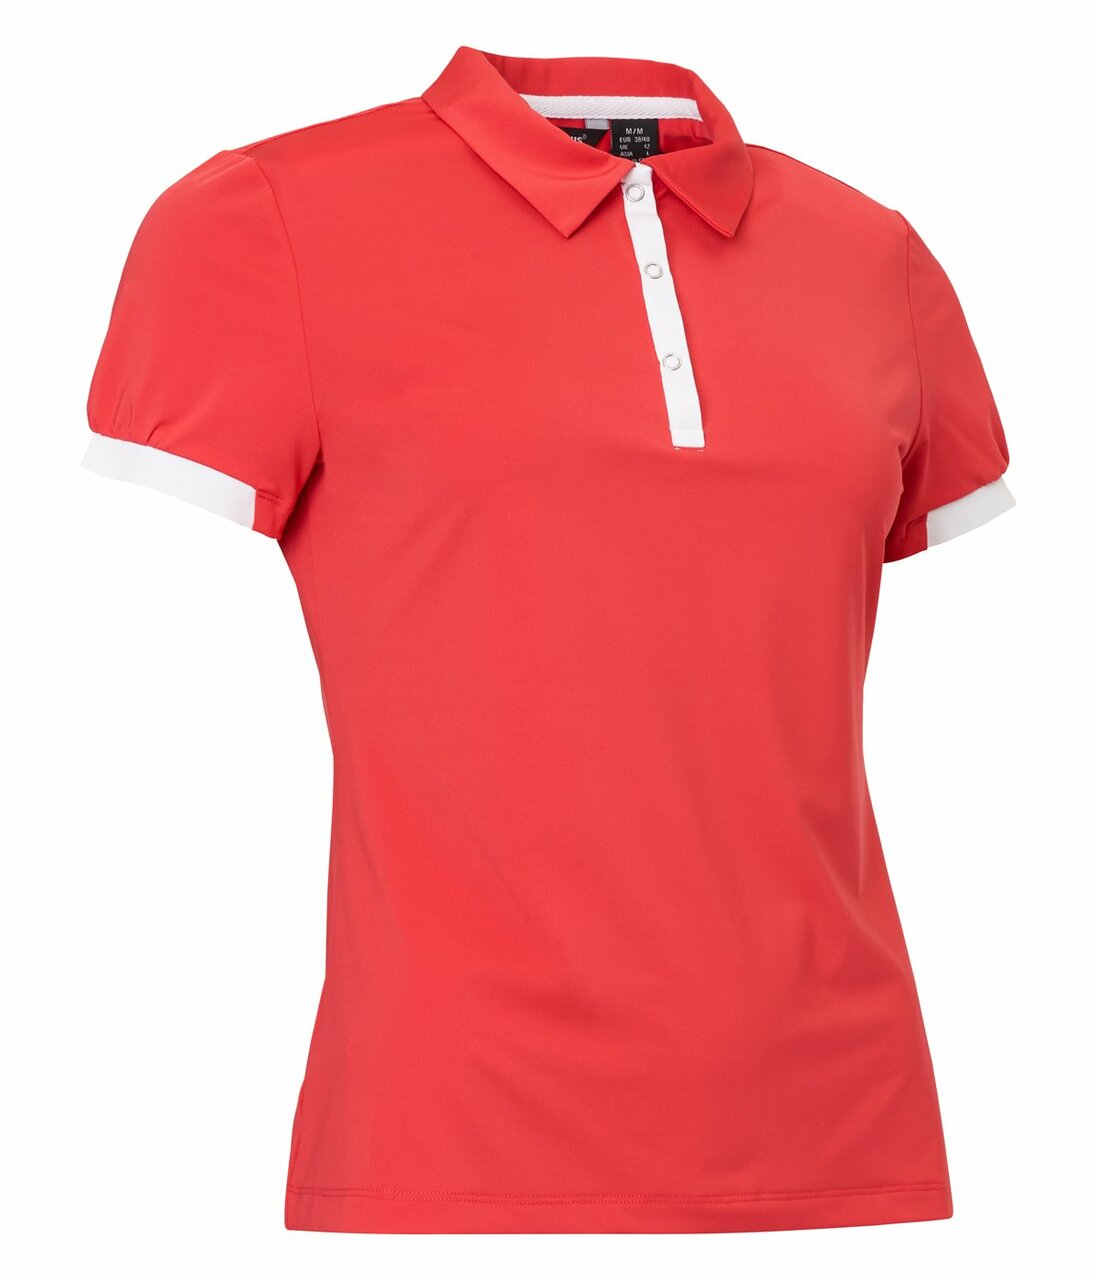 Abacus Sports Wear: Women’s High-Performance Golf Polo – Cherry (Poppy Red/Burnt Orange, Size: Large) SALE